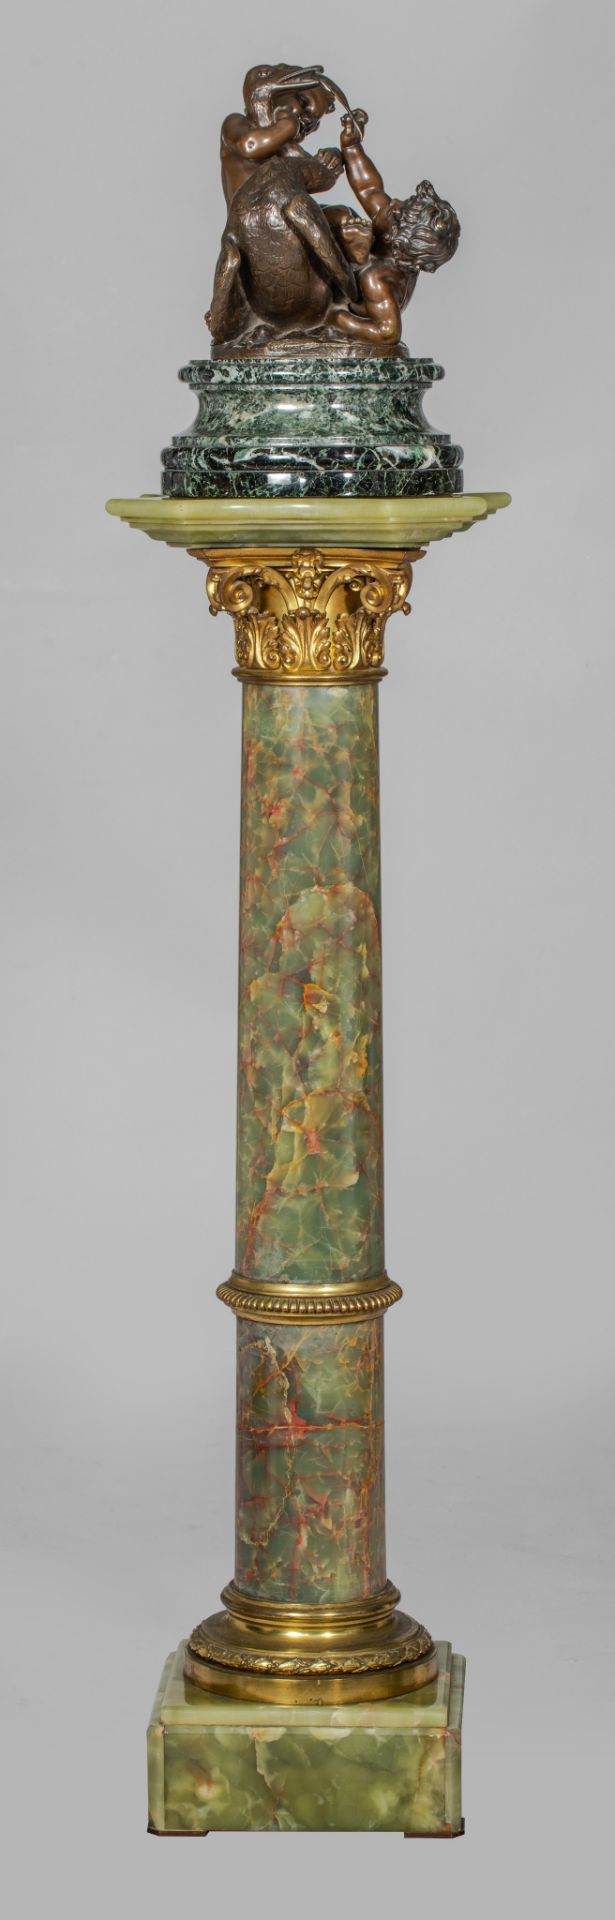 Clodion, putti playing with a swan, patinated bronze on a marble pedestal, H 145 cm (total height) - Image 5 of 18